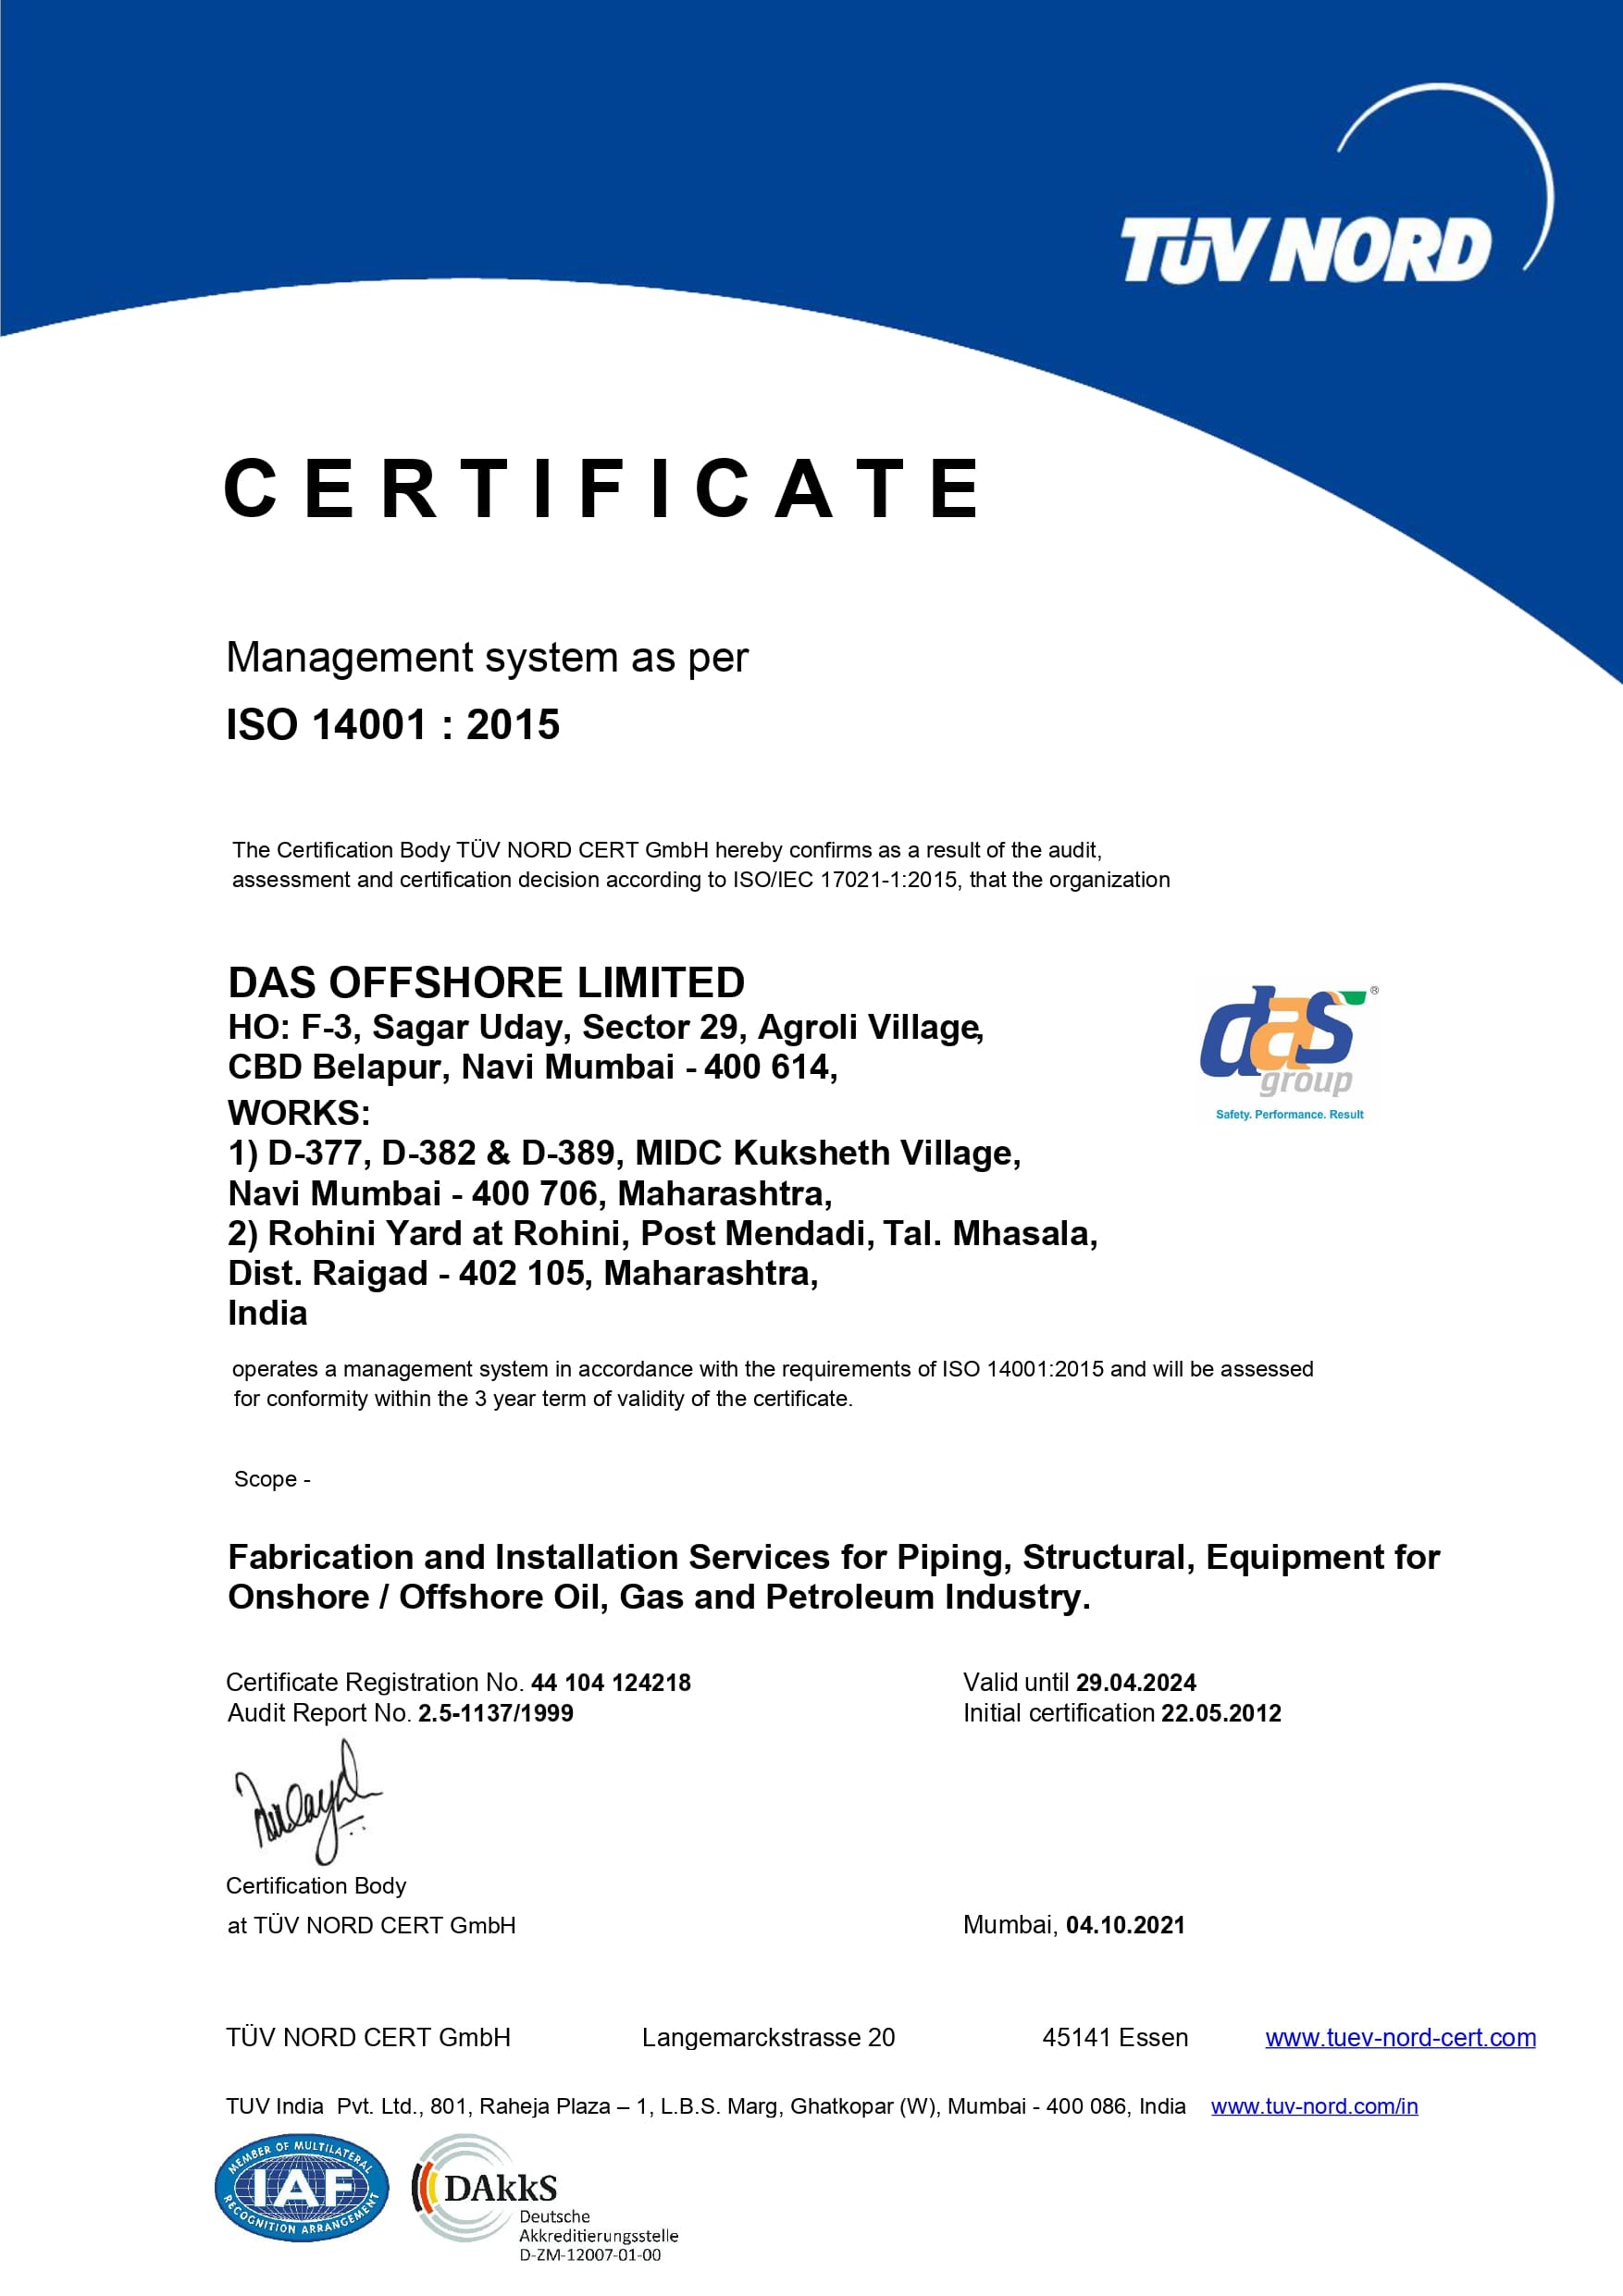 Management system as per ISO 14001 : 2015